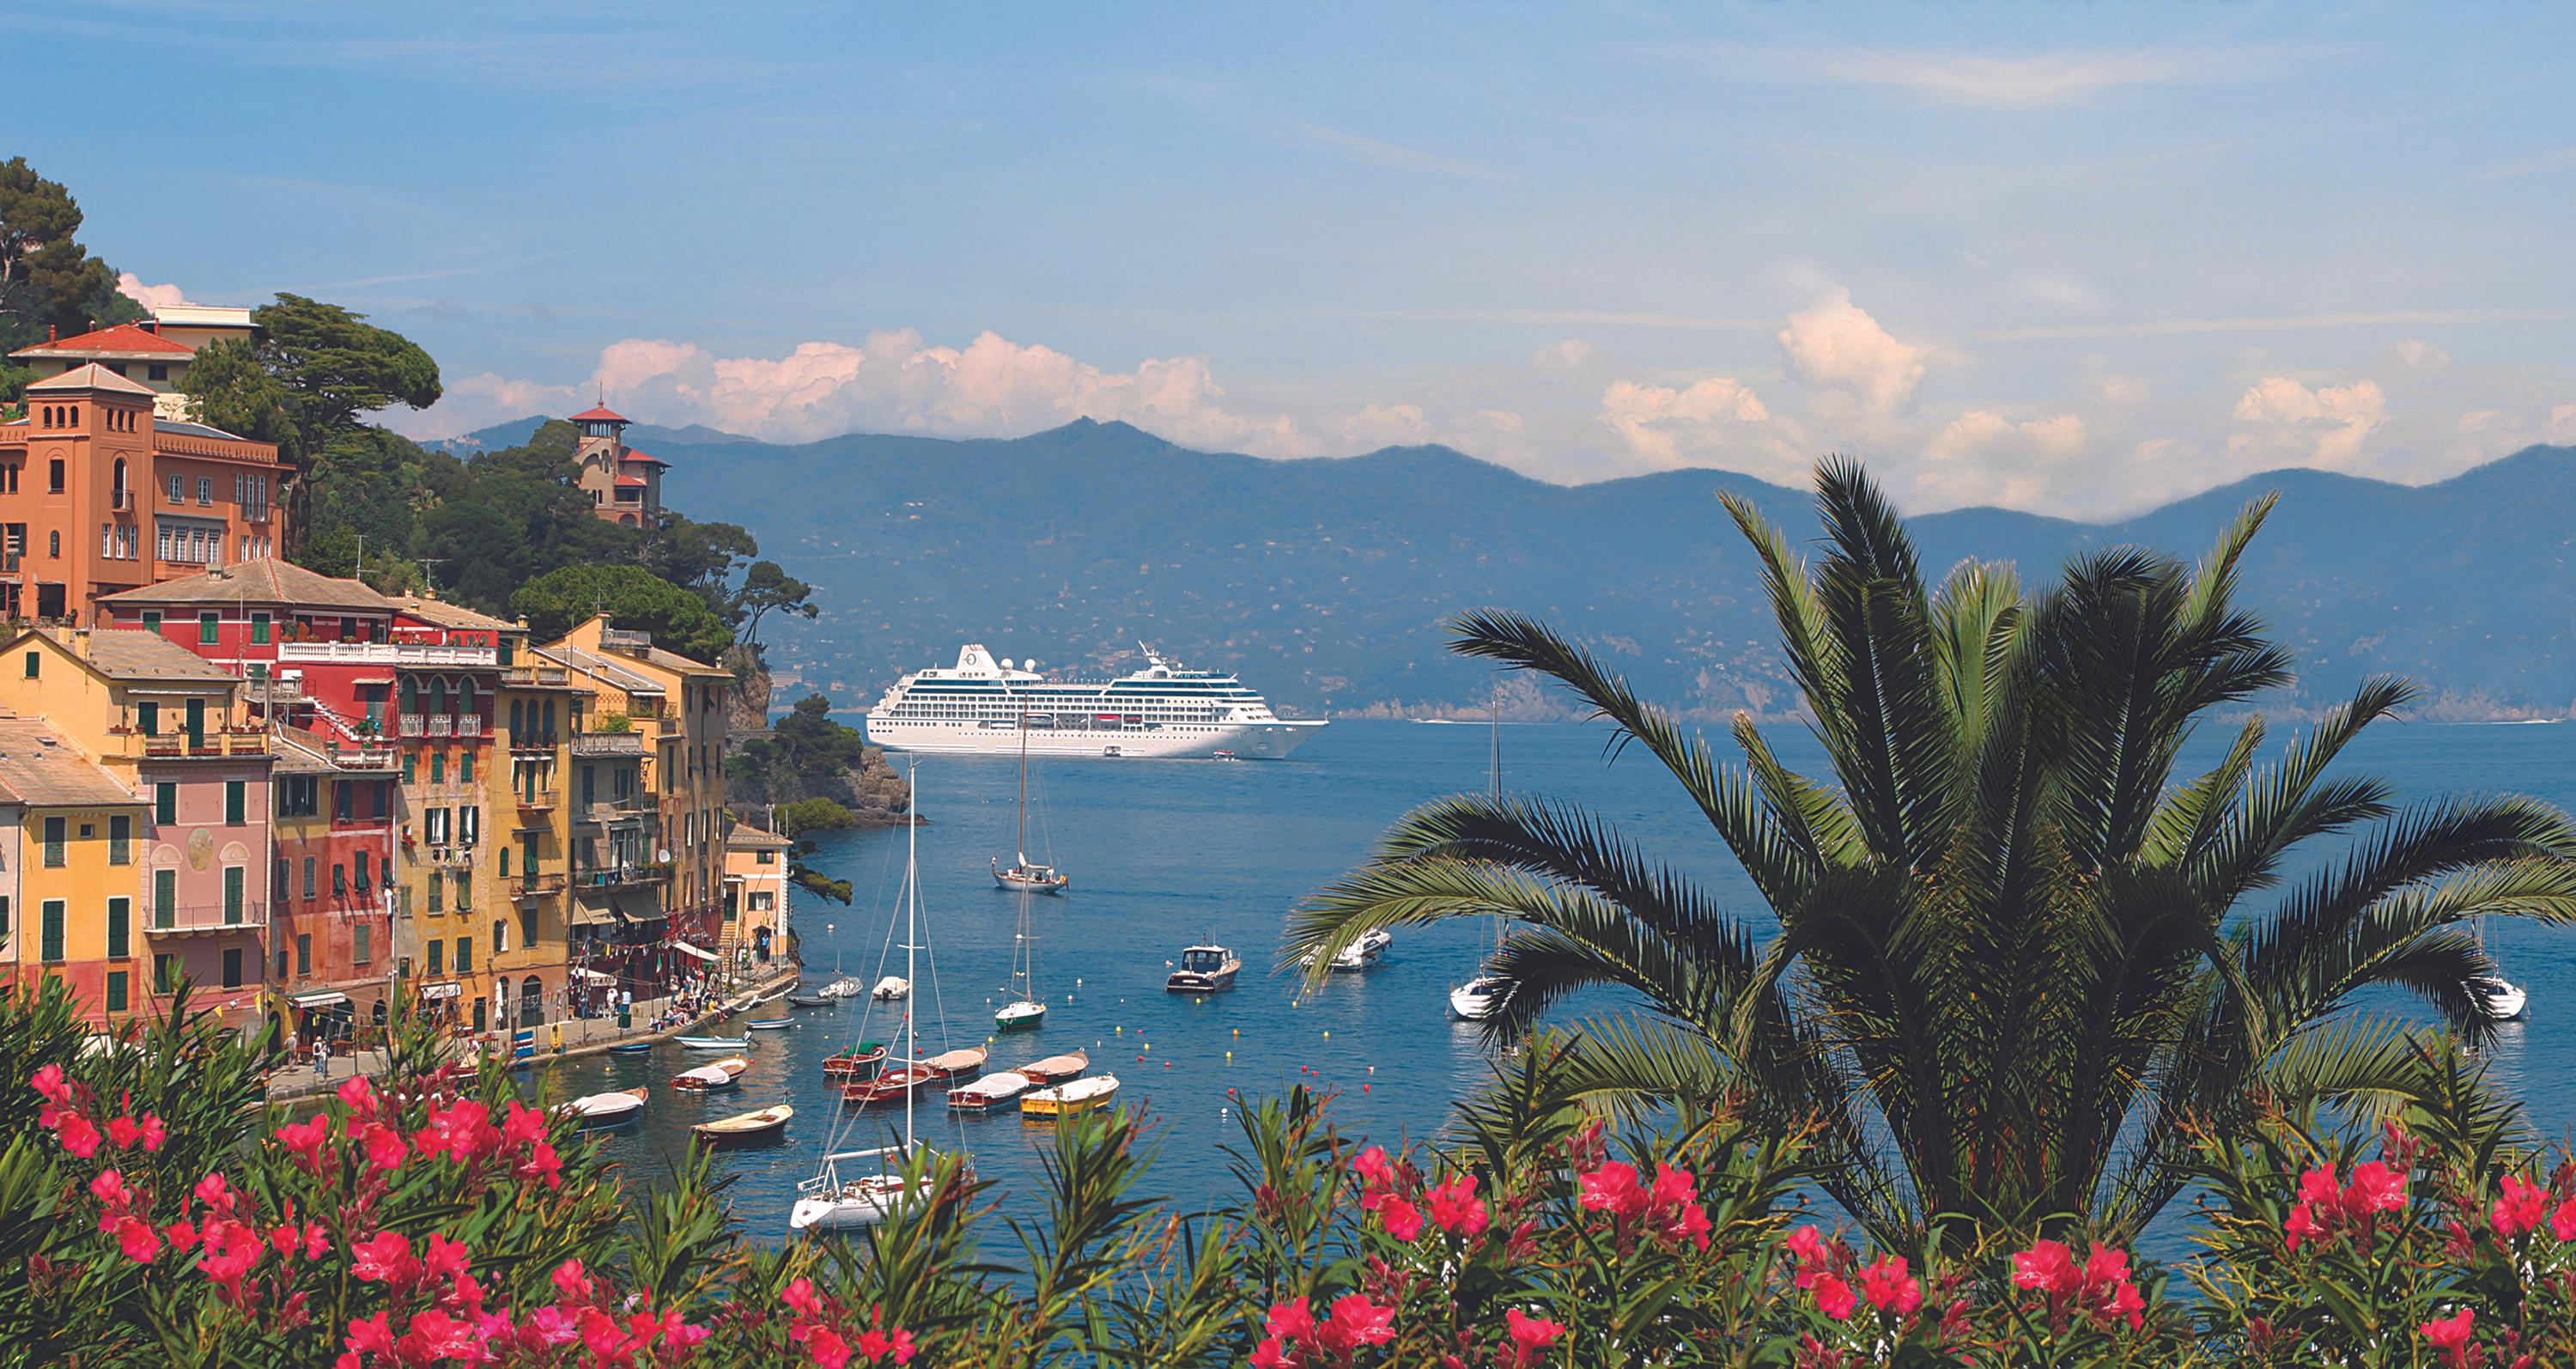 Join Carolyn on a 10 day Mediterranean cruise on the beautiful Sirena sailing May 15, 2024.